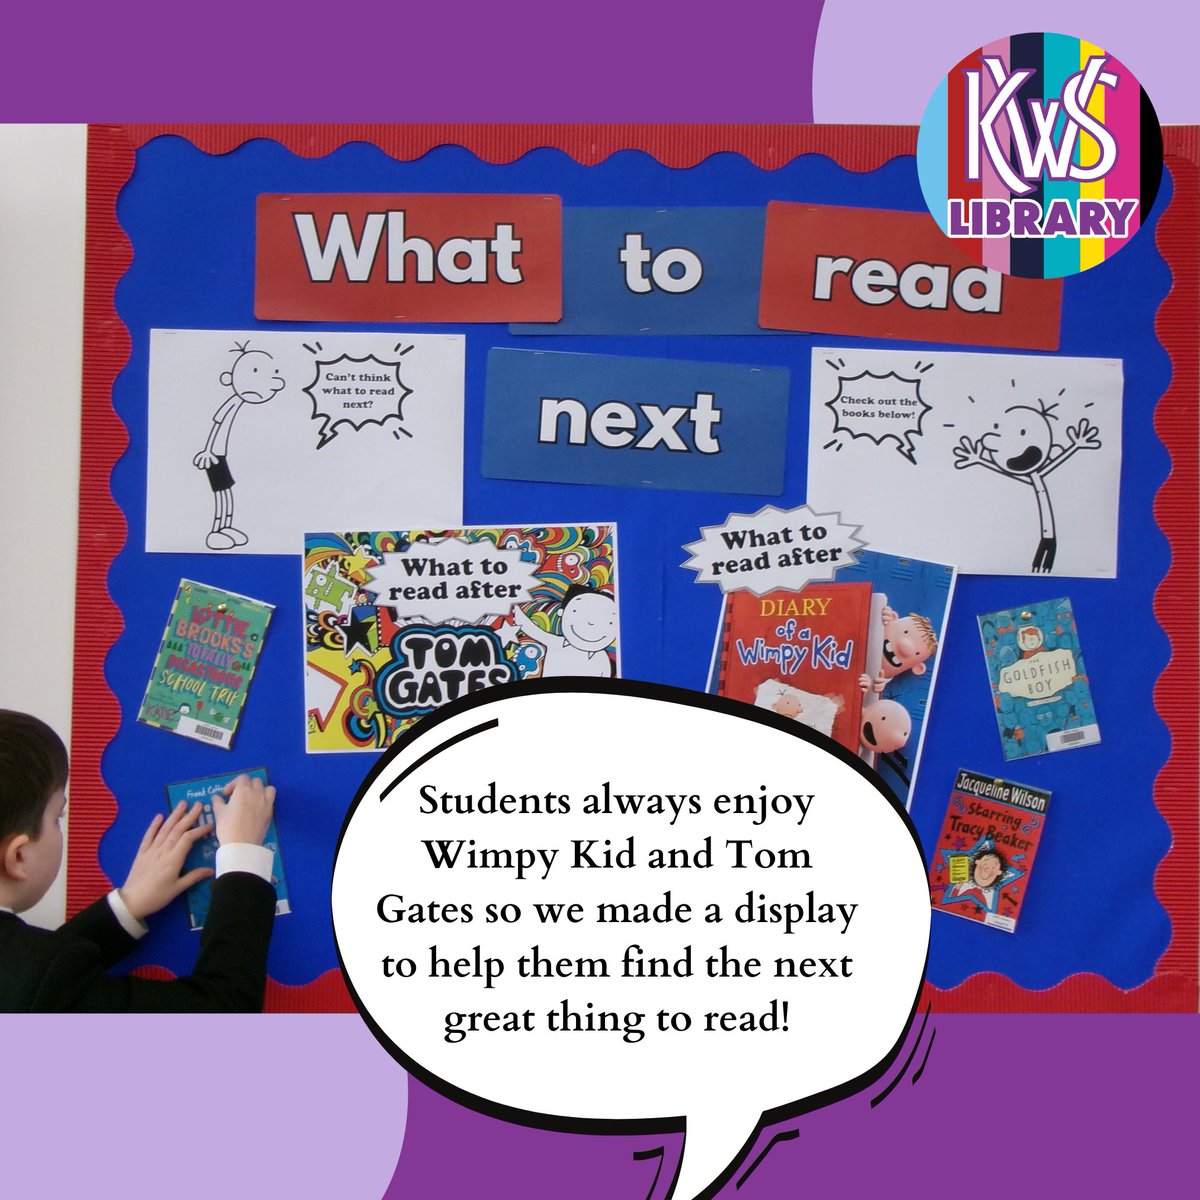 This week we made a display for our students who love Wimpy Kid and Tom Gates books but want to find something new to read!